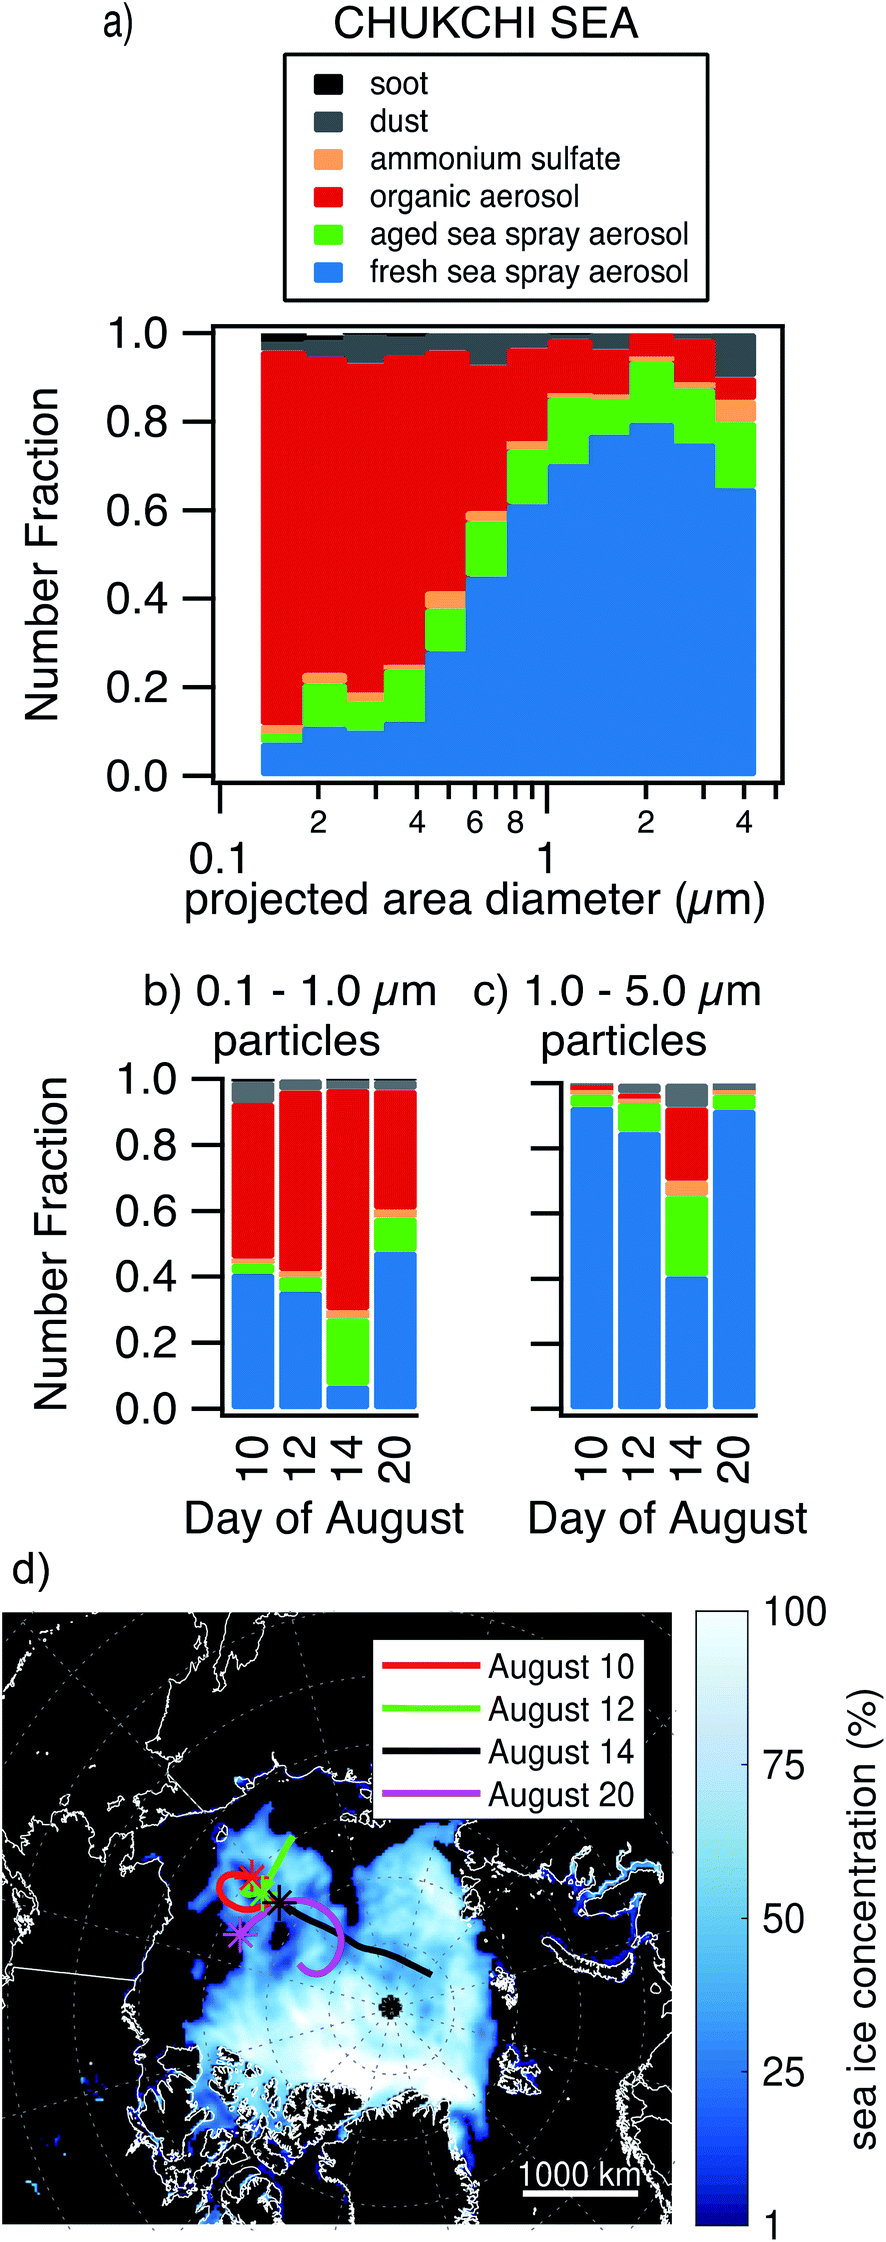 Emerging Investigator Series Influence Of Marine Emissions And Atmospheric Processing On Individual Particle Composition Of Summertime Arctic Aerosol Over The Bering Strait And Chukchi Sea Environmental Science Processes Impacts Rsc